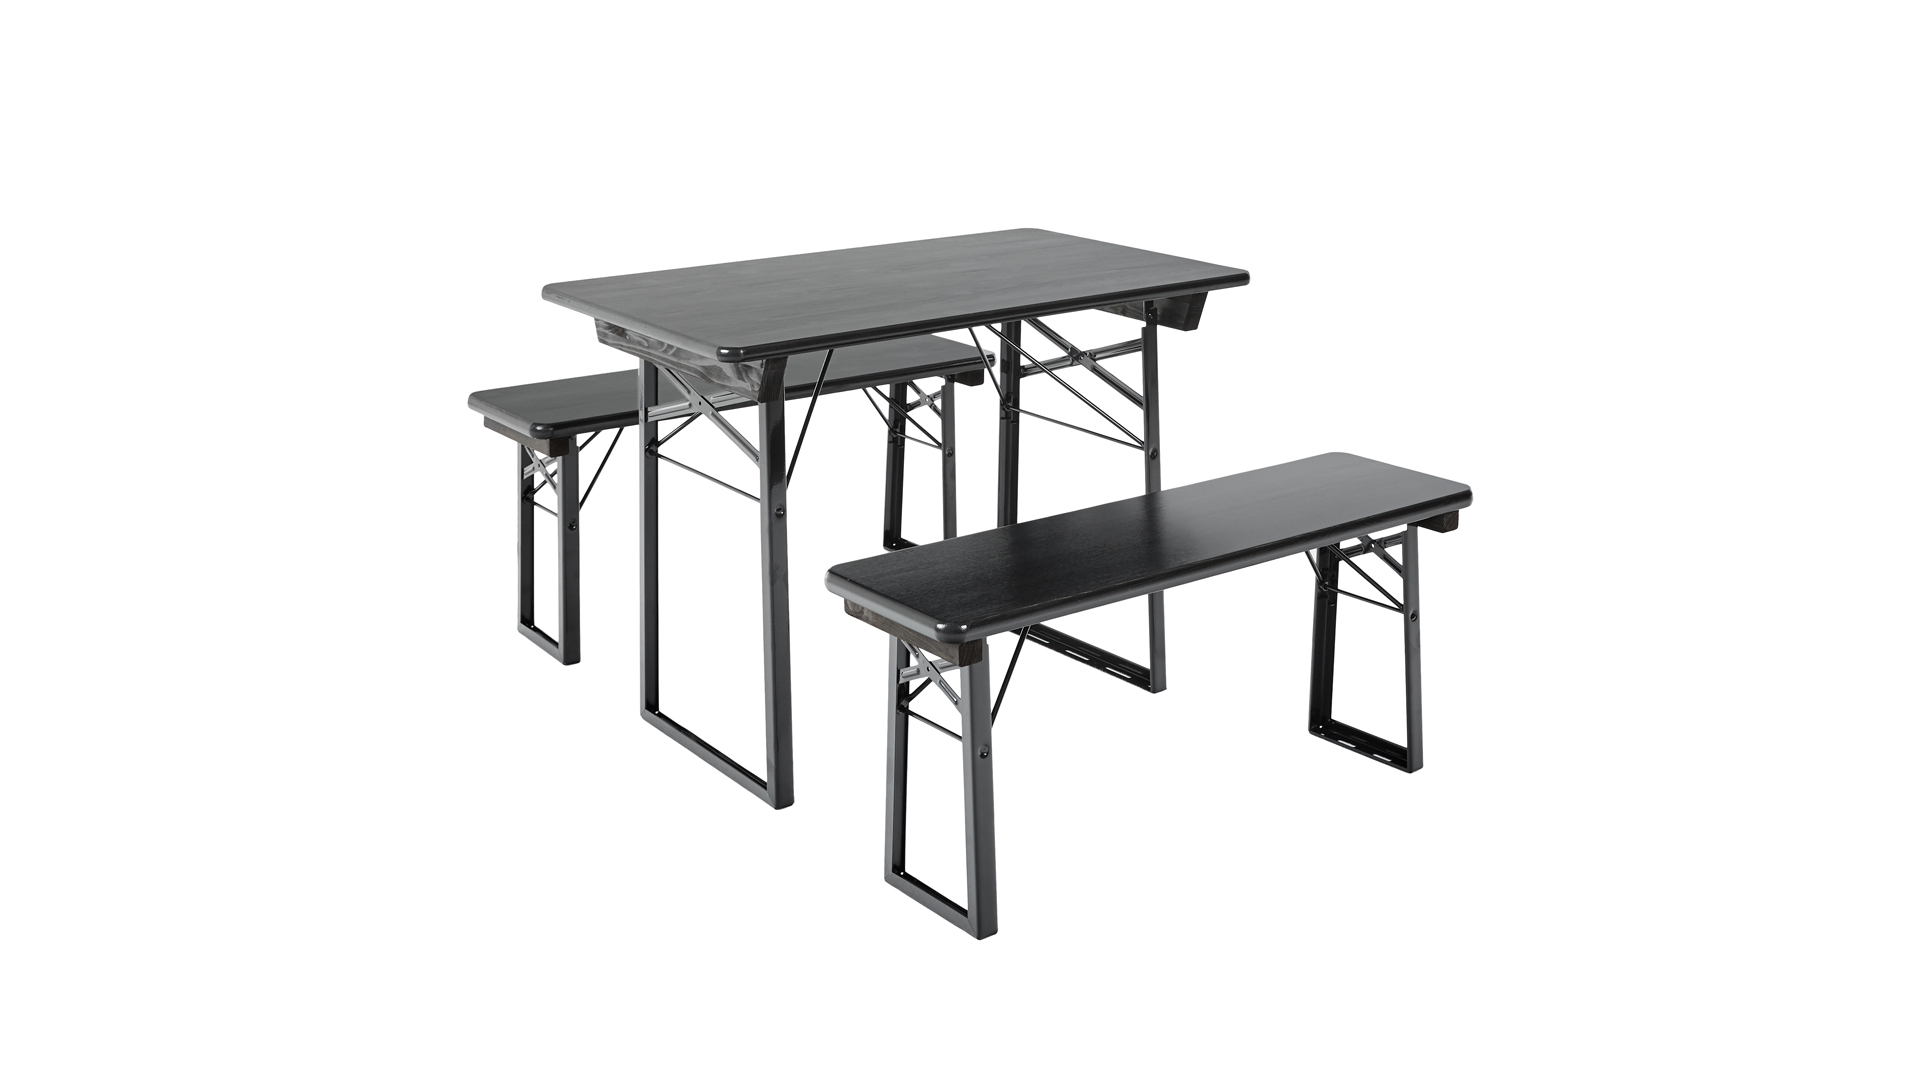 The small beer garden table sets Shorty in black